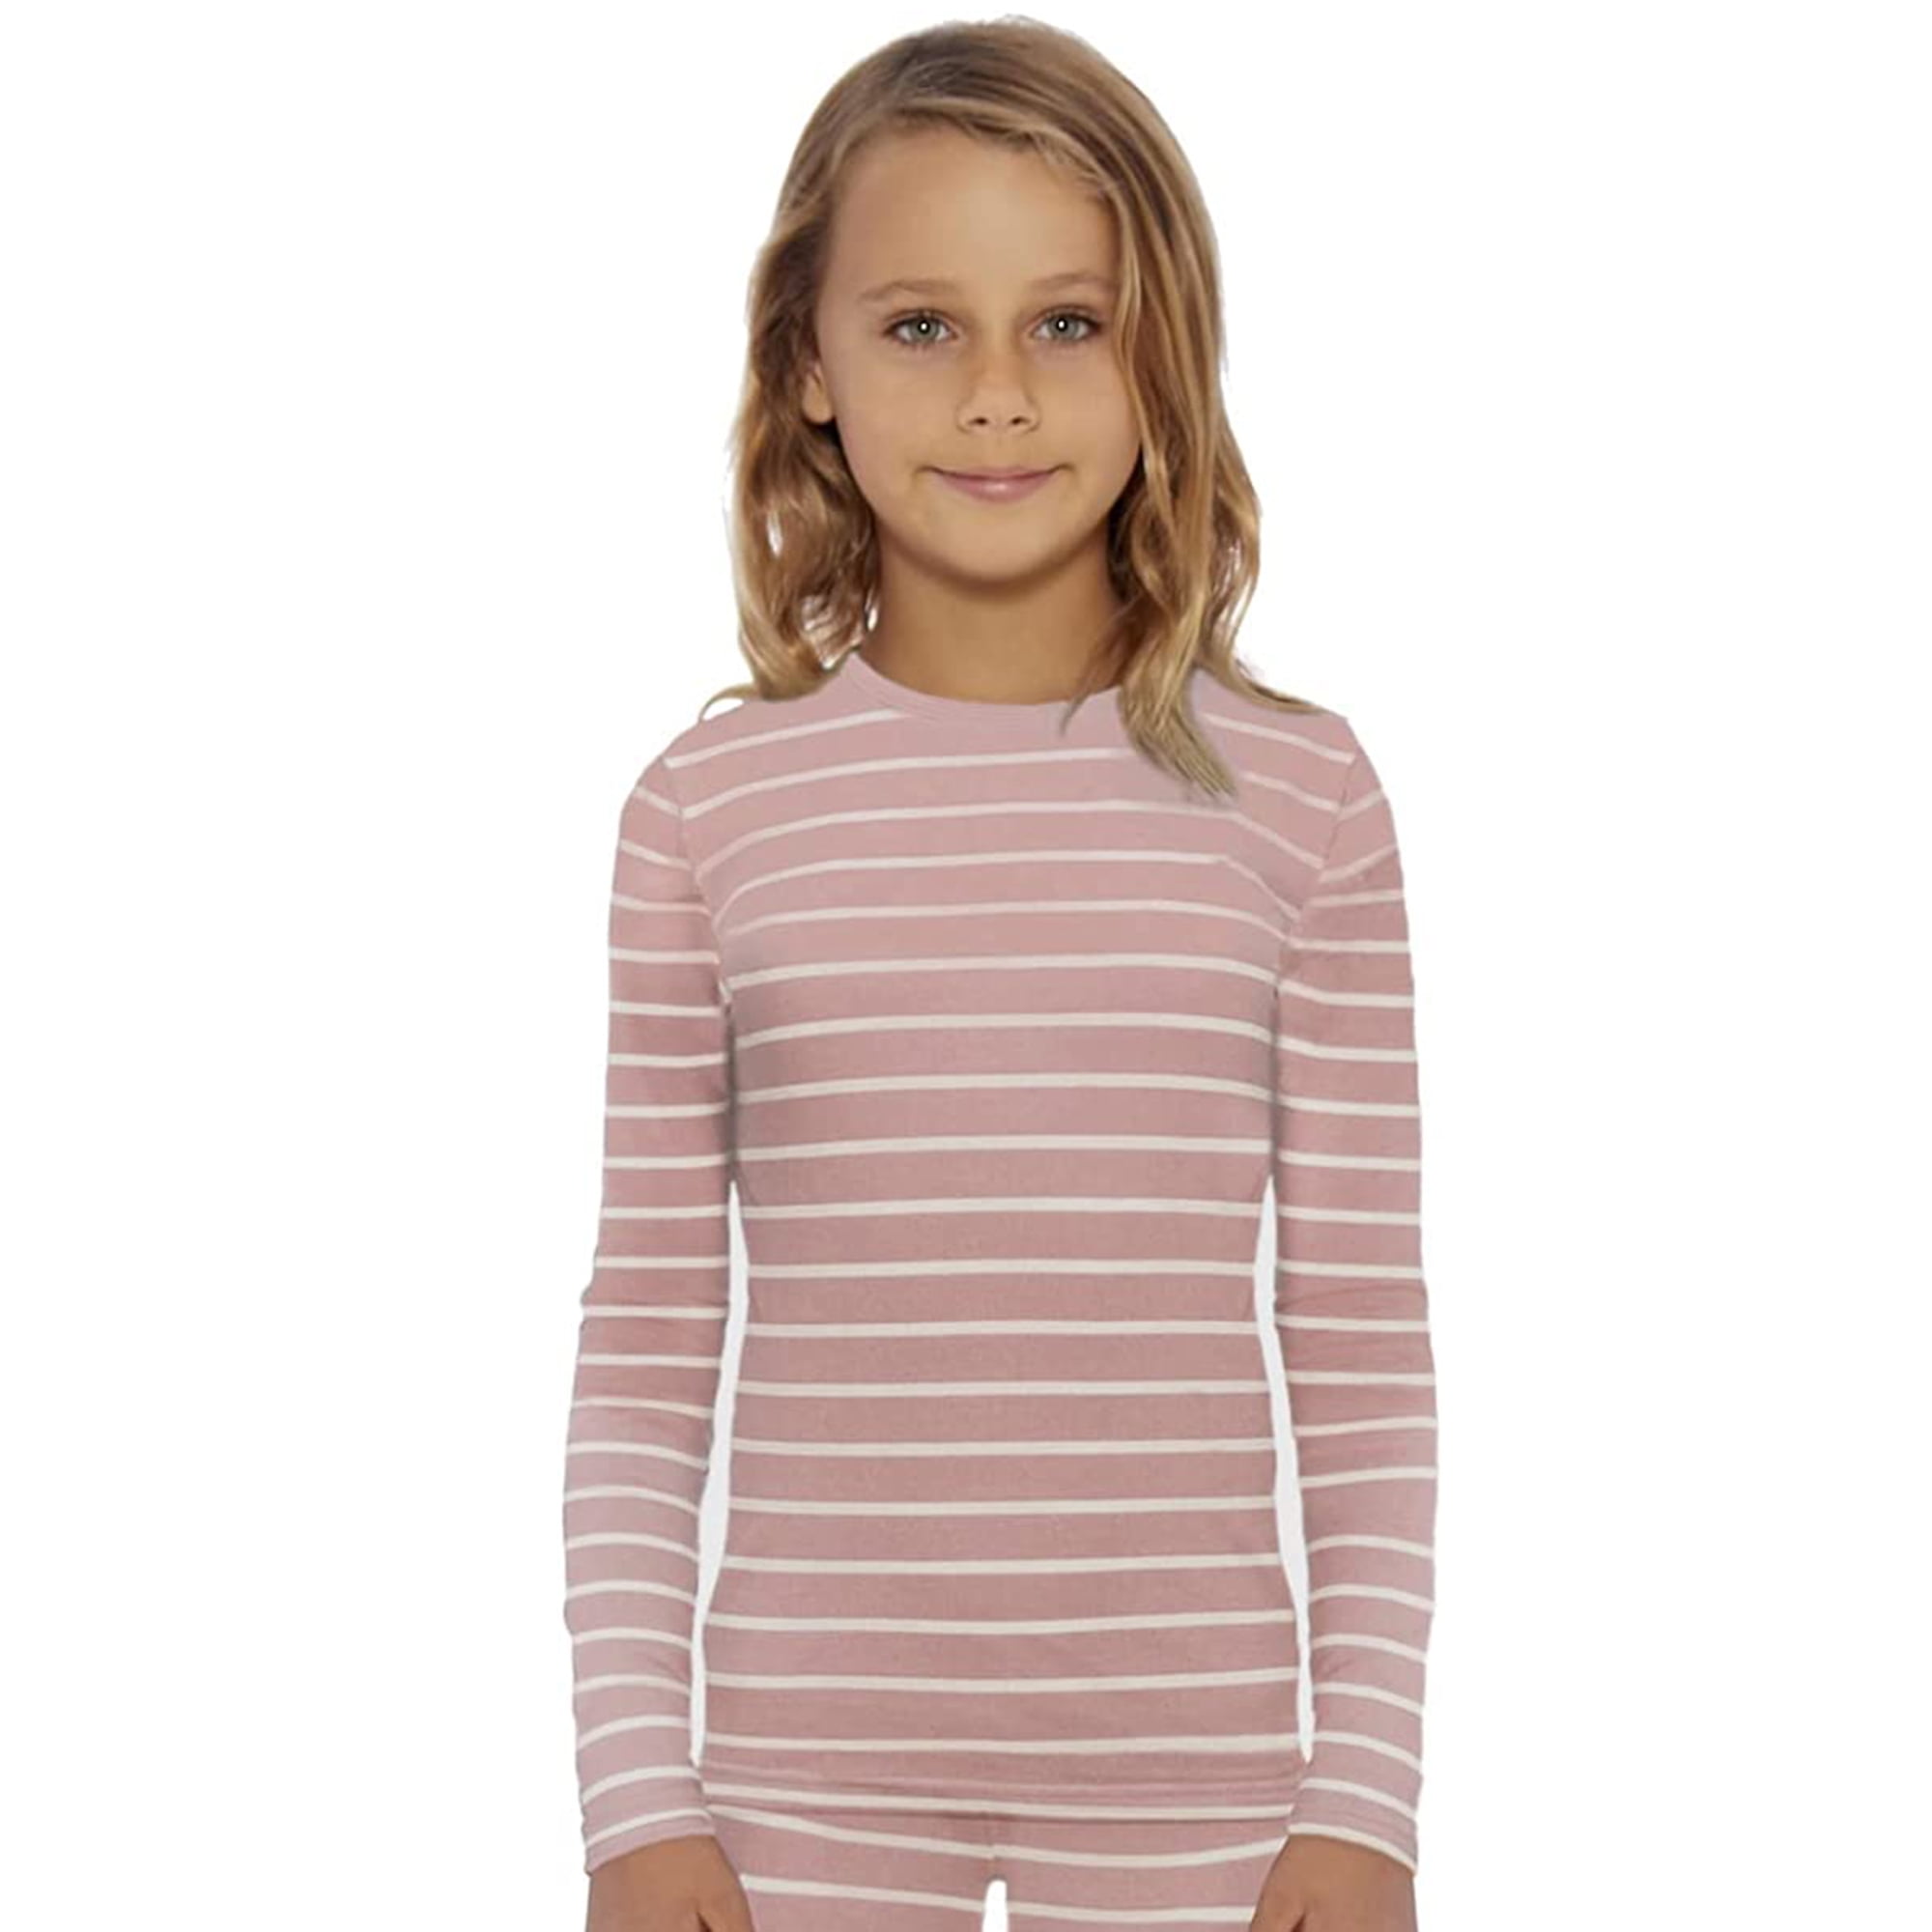 Rocky Kids Thermal Underwear Shirt for Girls Base Layer Long Johns, Pink  Striped Large 